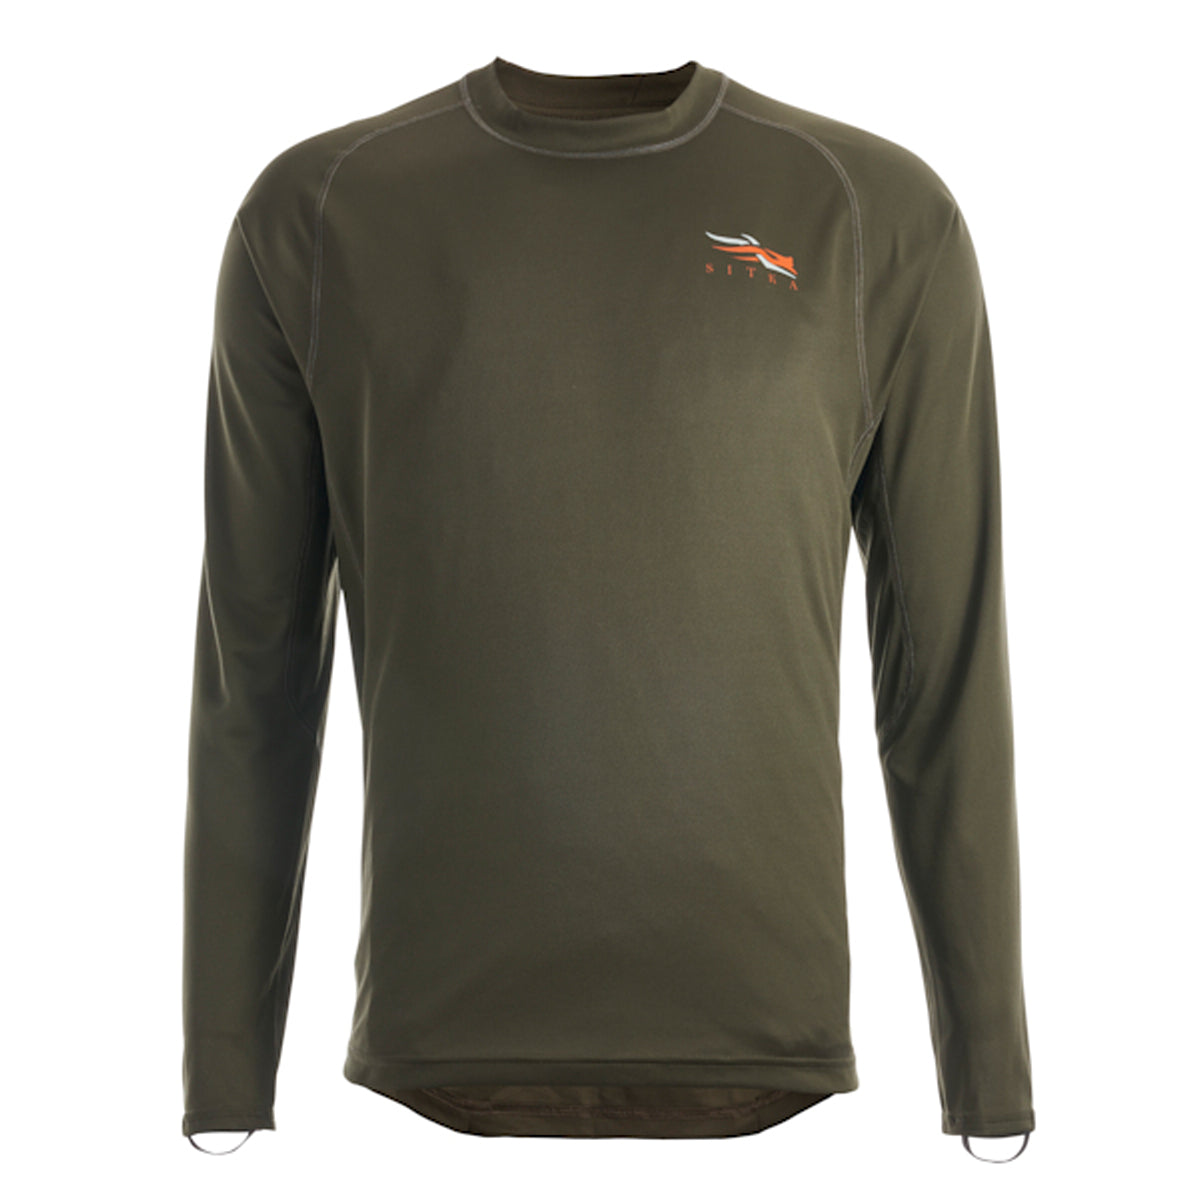 Sitka Core Lightweight Crew Long Sleeve by Sitka | Apparel - goHUNT Shop